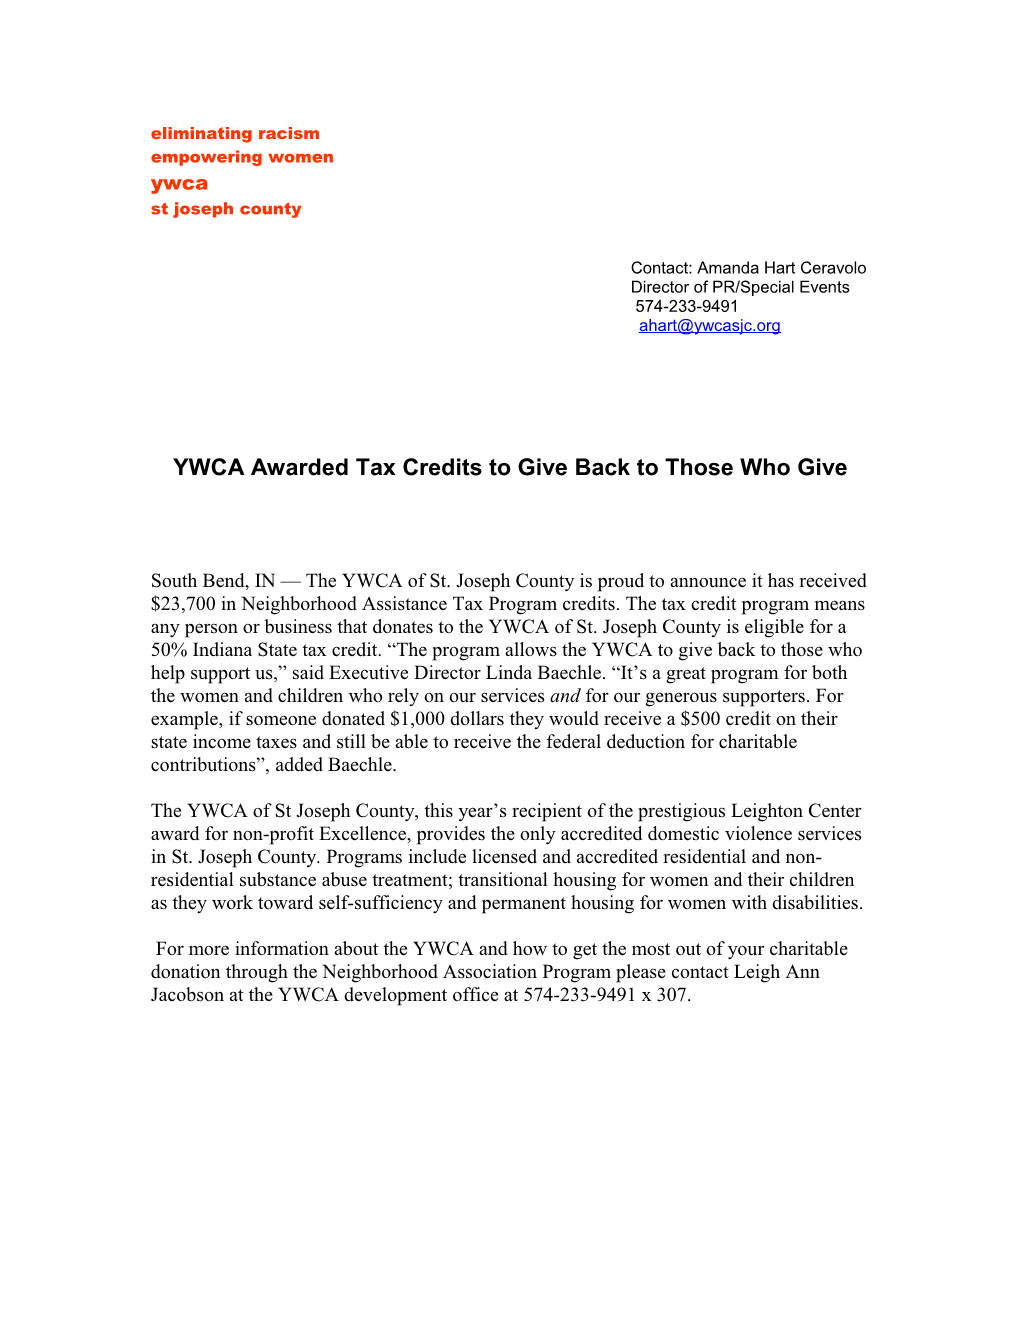 YWCA Awarded Tax Credits to Give Back to Those Who Give